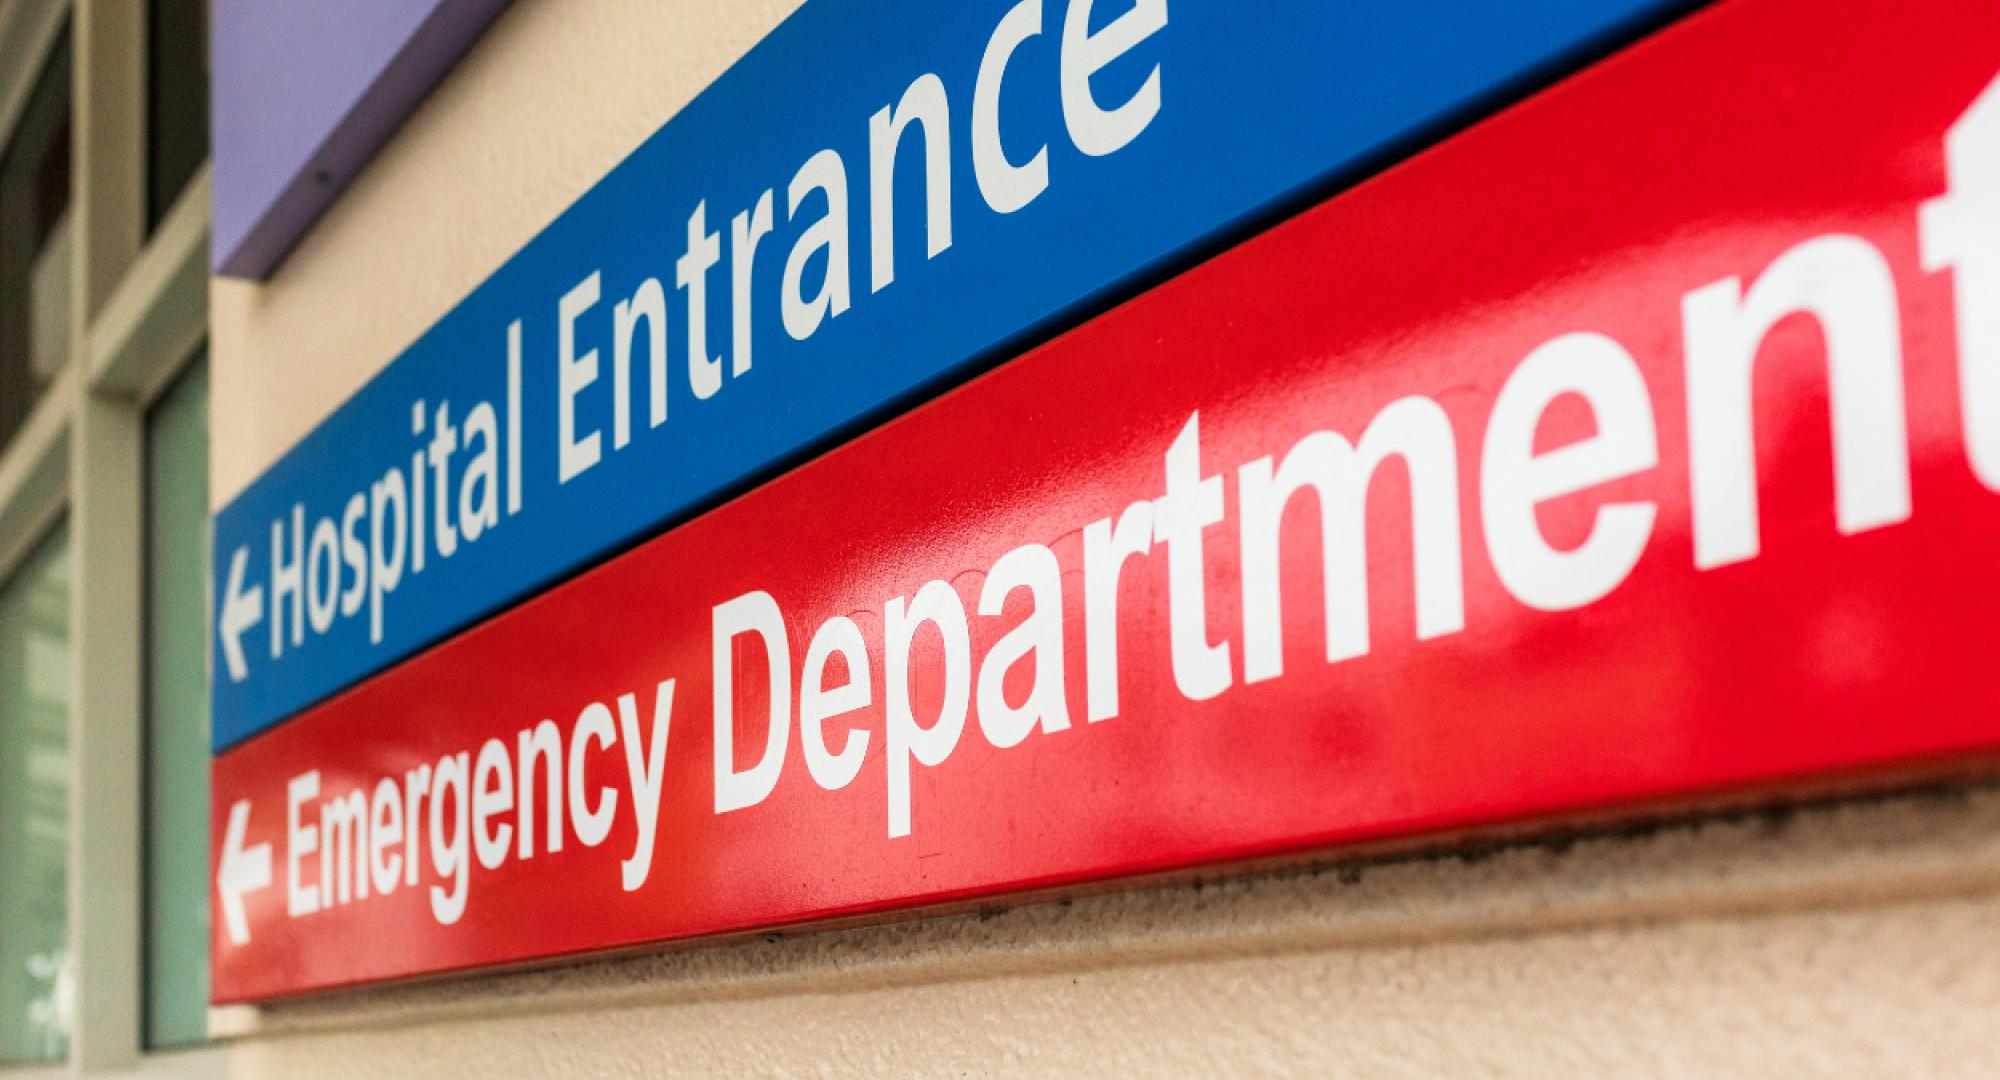 Close-up of an Emergency Department sign